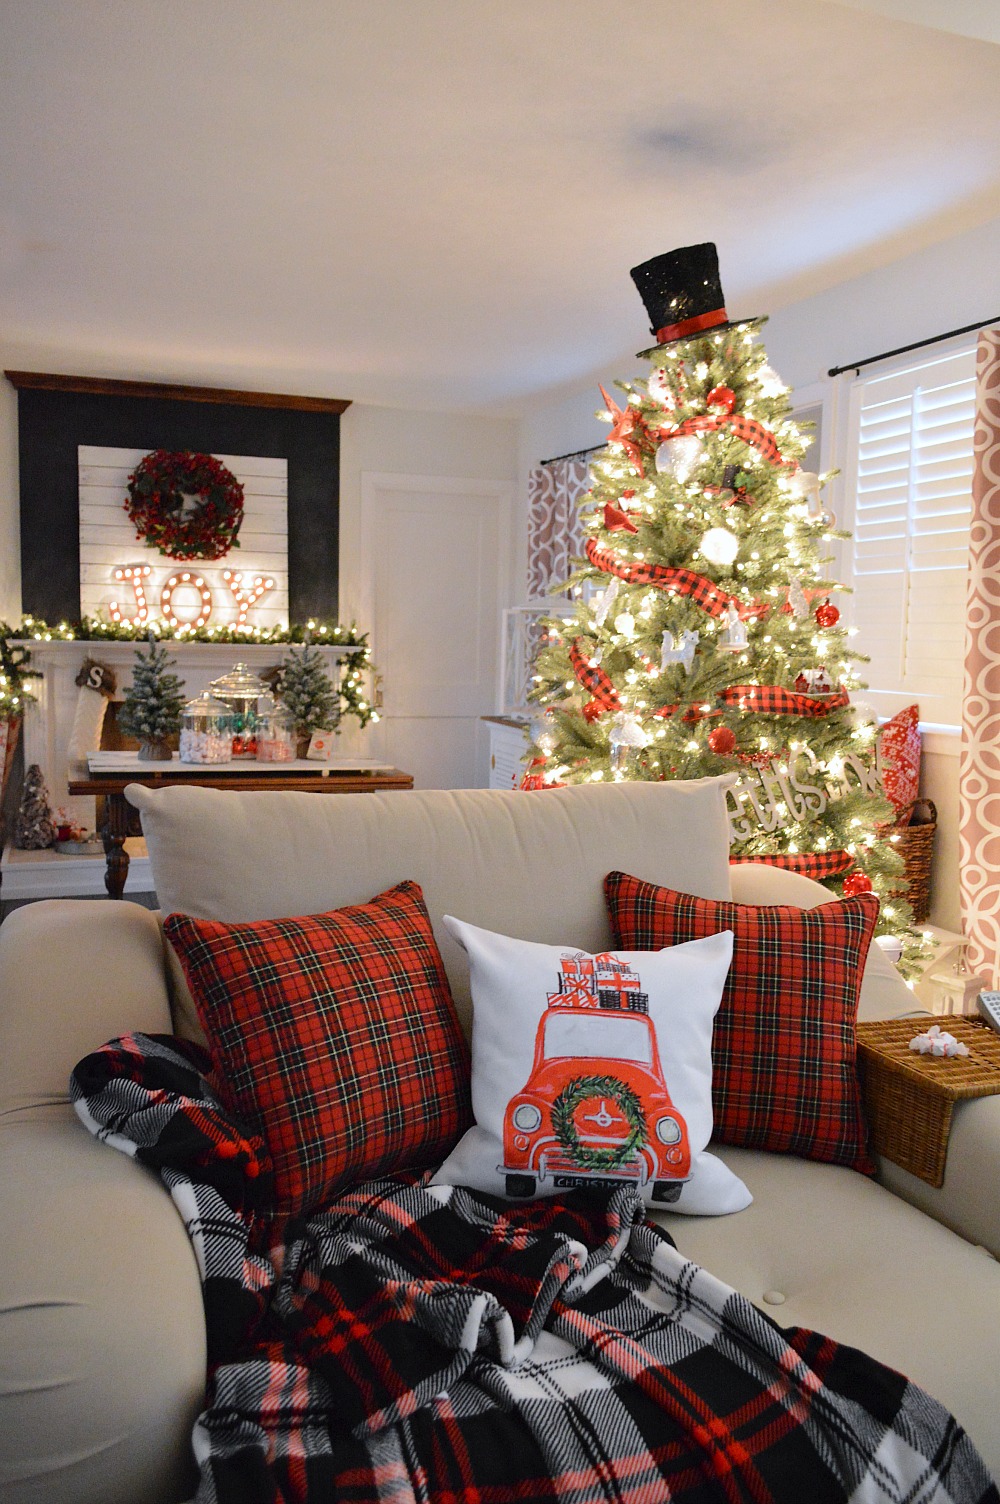 Cottage Christmas Home Tour - JOY Fireplace Mantel -Decorating with classic red and plaid at foxhollowcottage.com